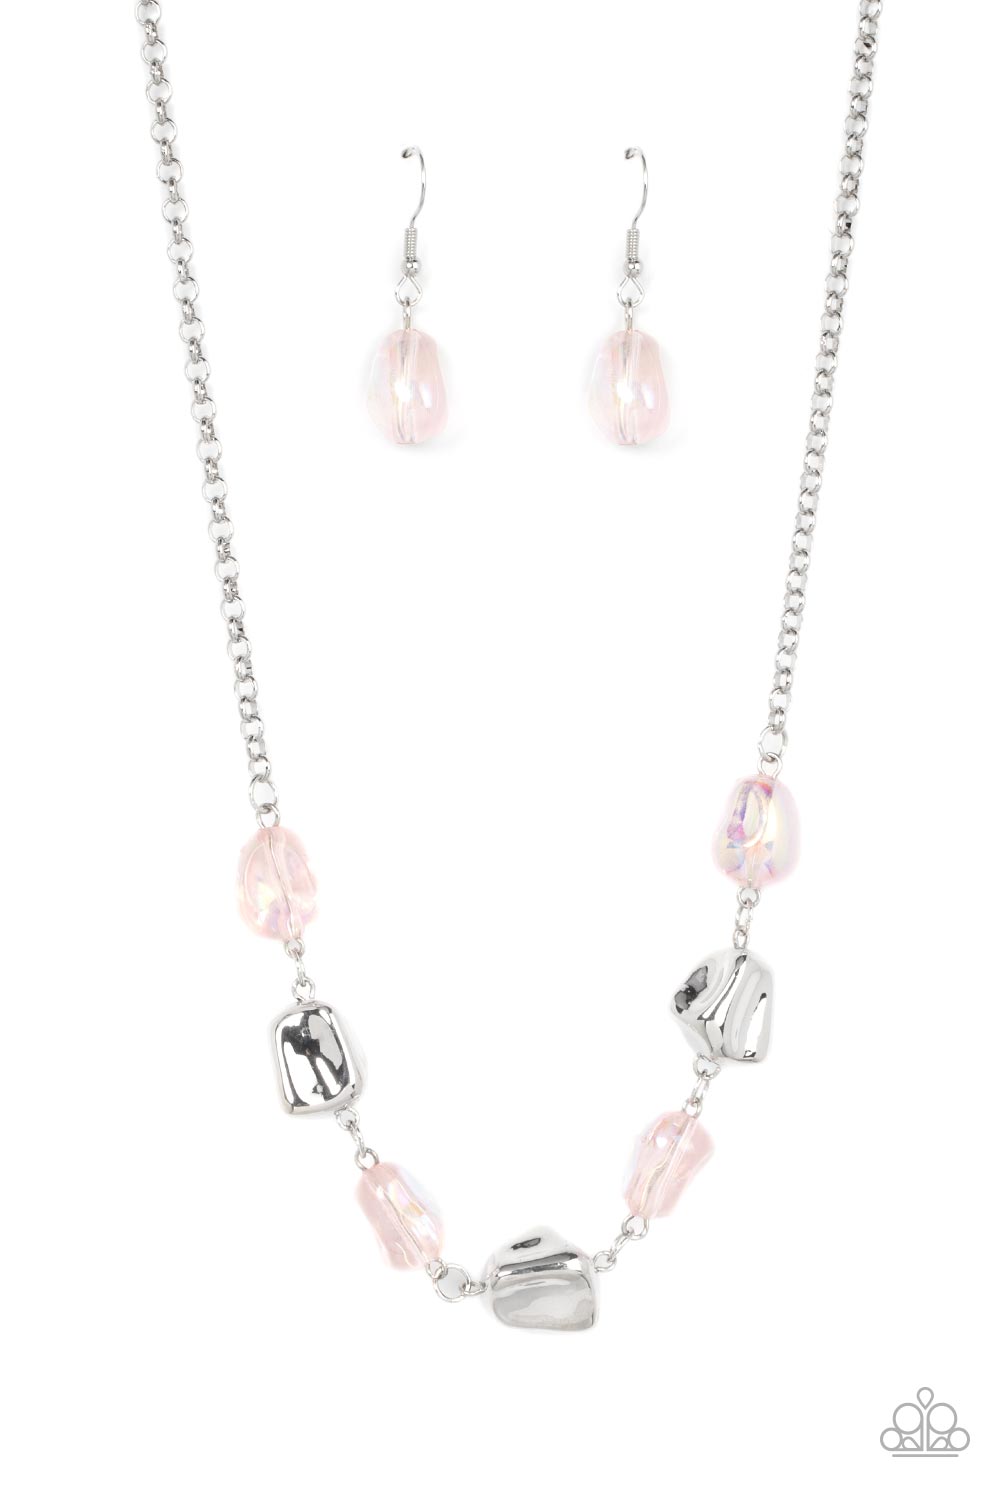 Royal Iridescence - Rose Gold Necklace with Iridescent and White Rhine –  All That Sparkles XOXO